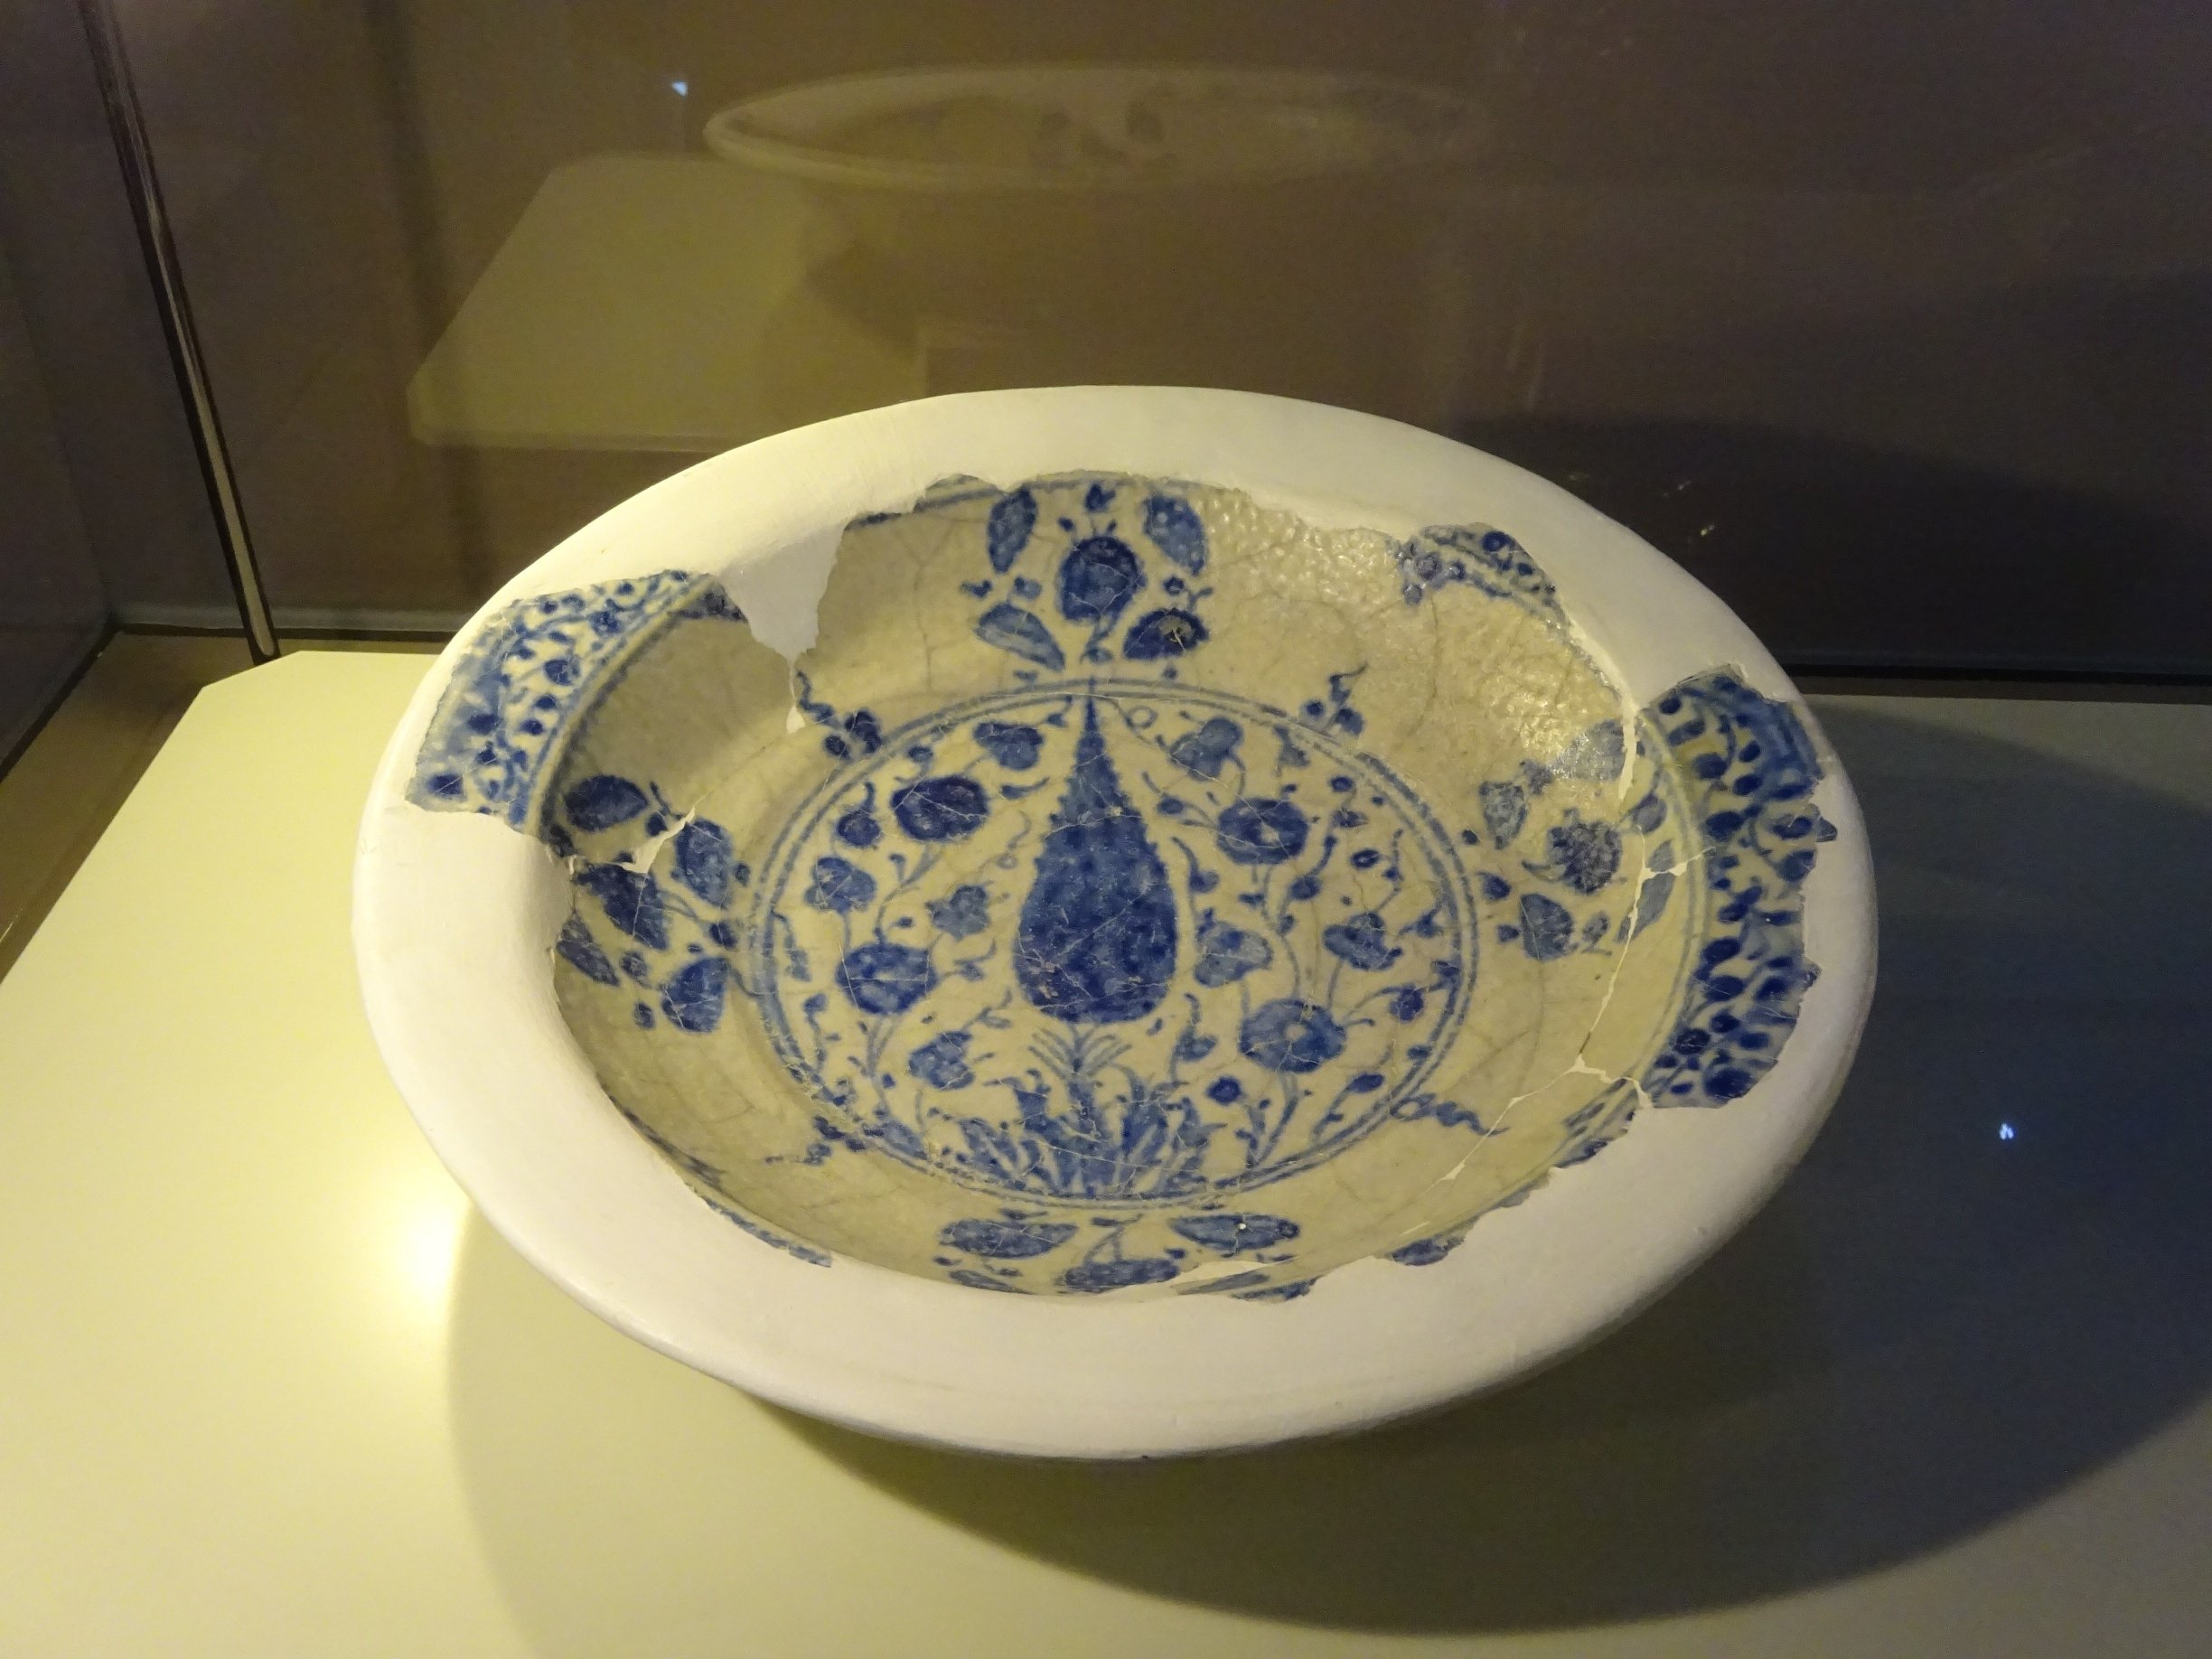 A medieval bowl with intricate patterns, Batman, Türkiye, May 26, 2023. (Photo by Peter Dore)